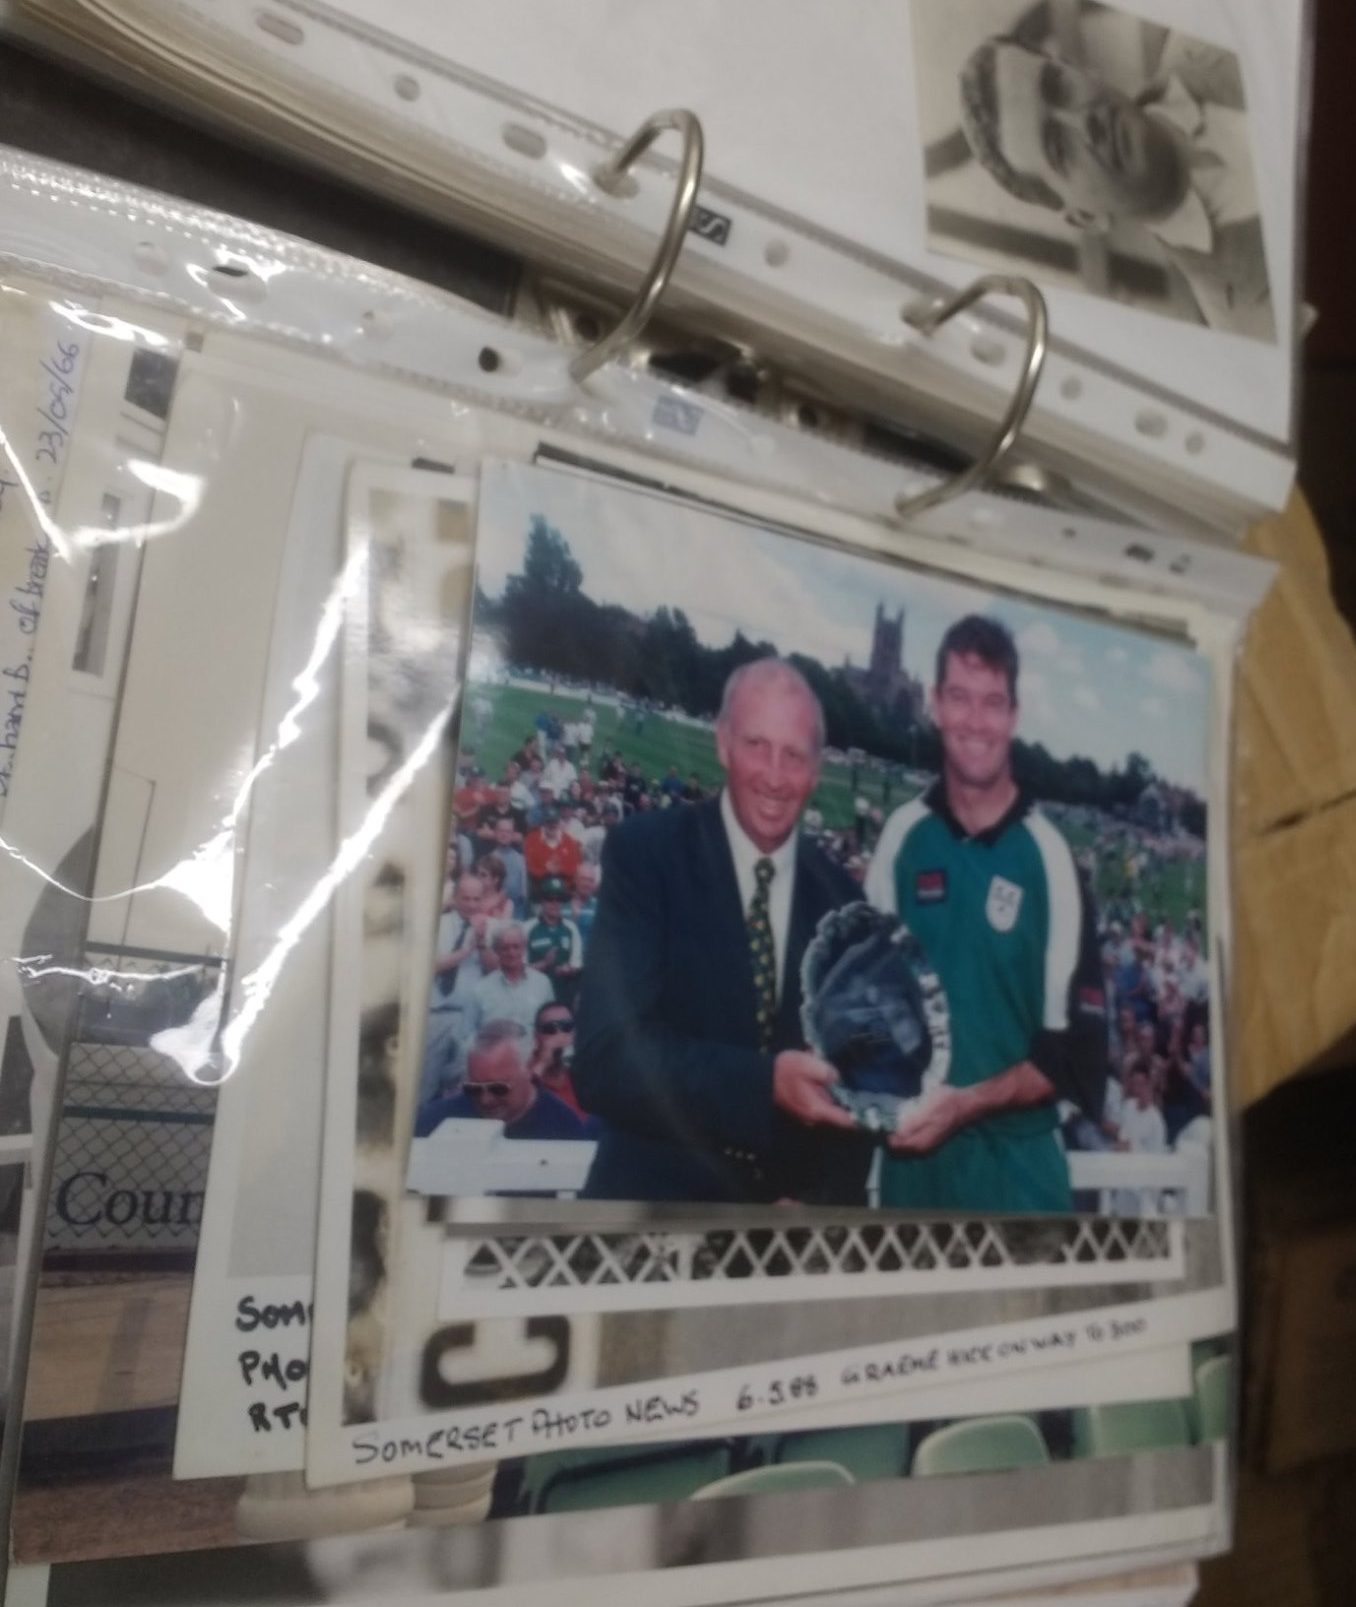 Graeme Hick photos in the archives